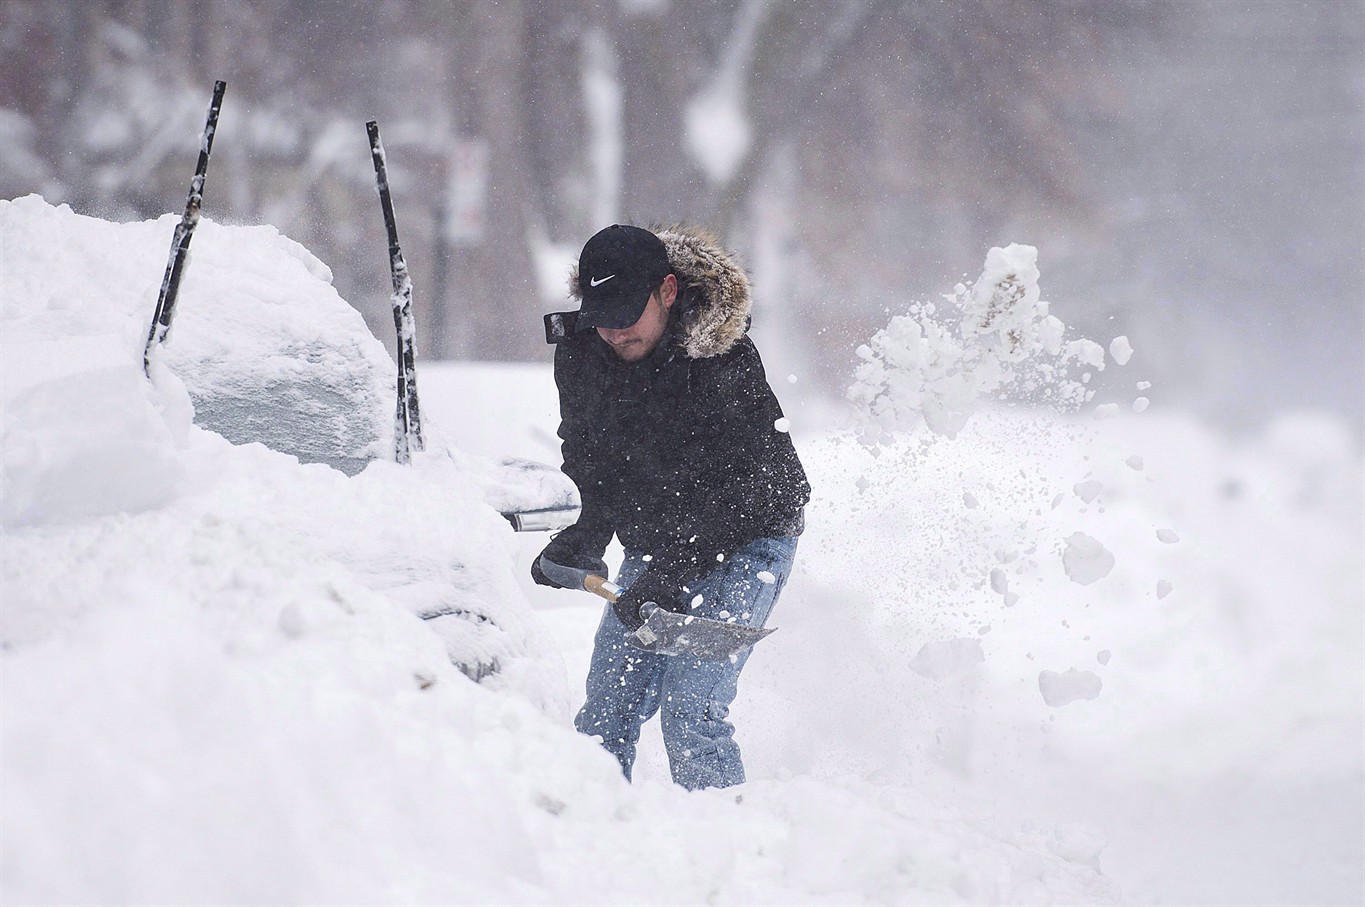 Canadians told to brace for a 'classic' Canadian winter with lots of